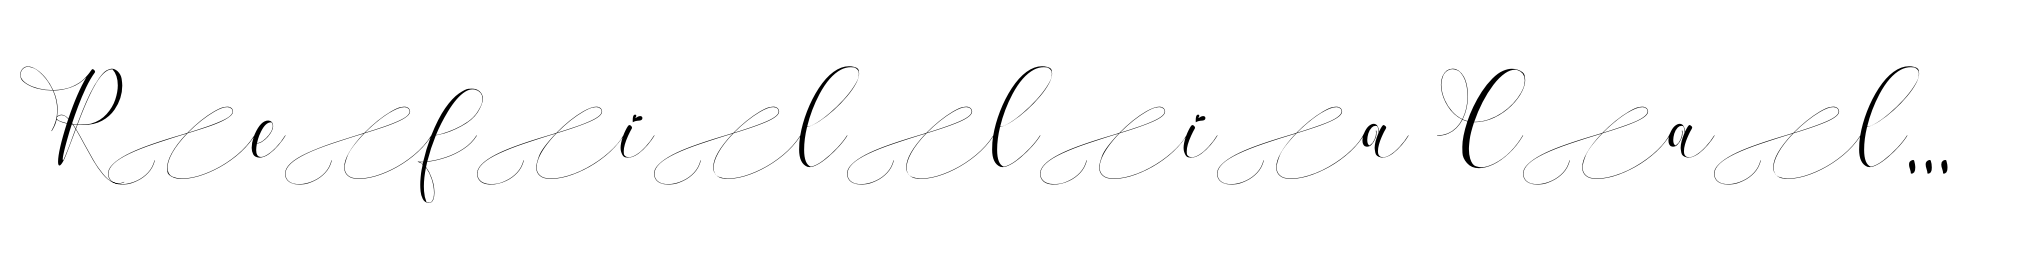 Refillia Calligraphy Titling 2 image